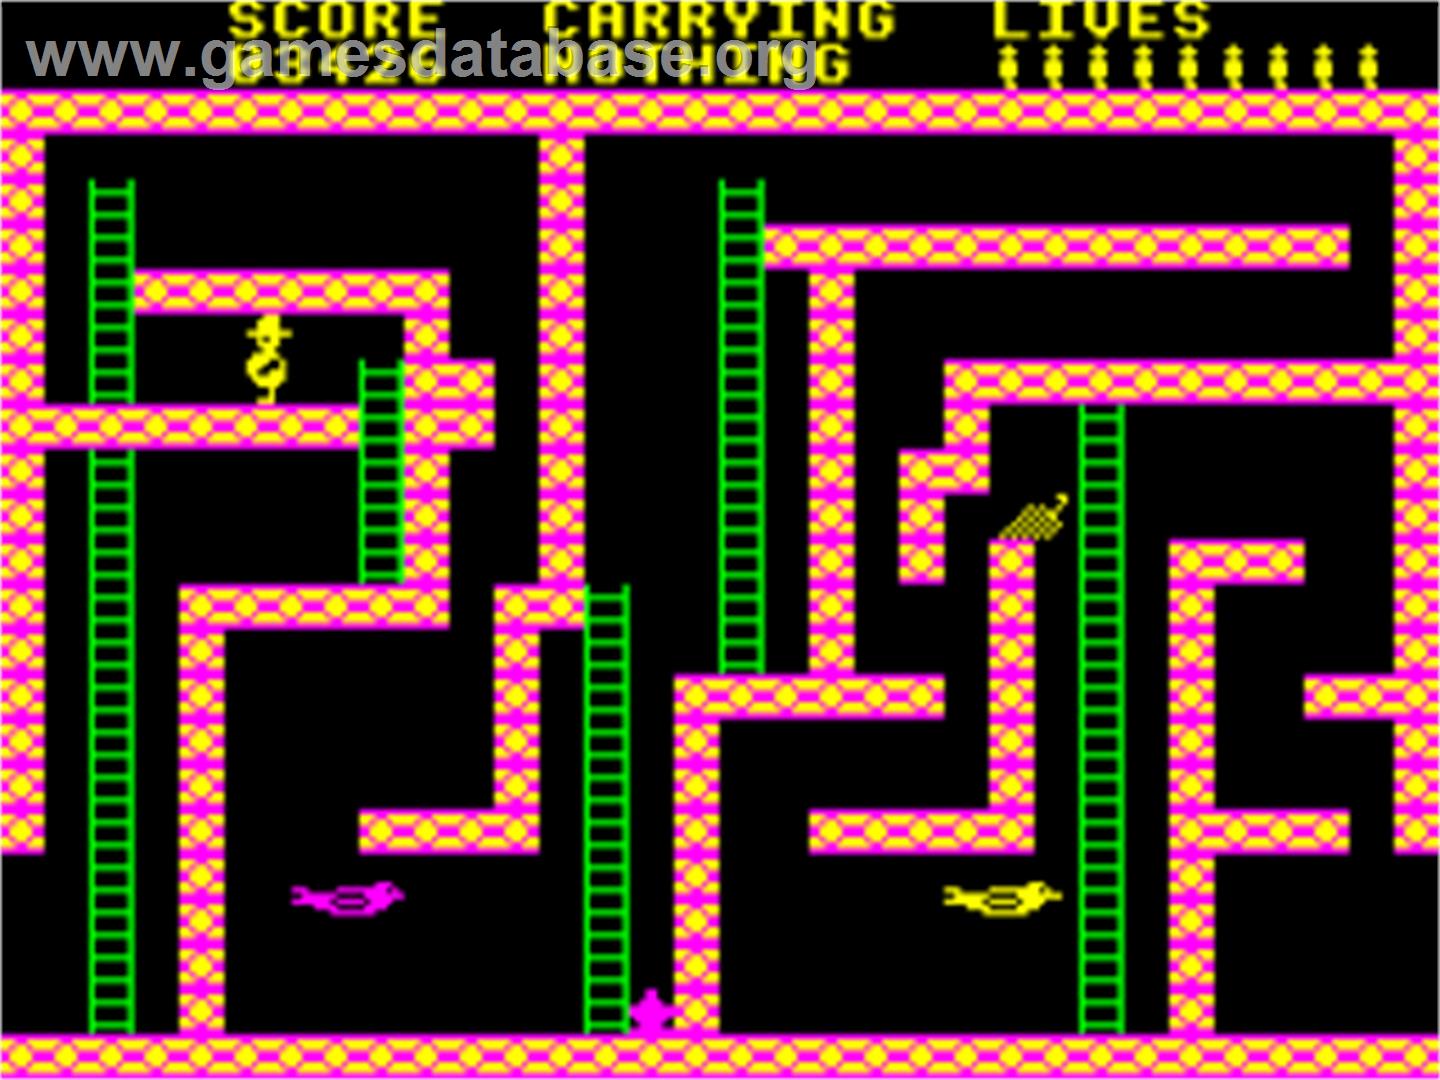 Chuckie Egg 2 - Amstrad CPC - Artwork - In Game